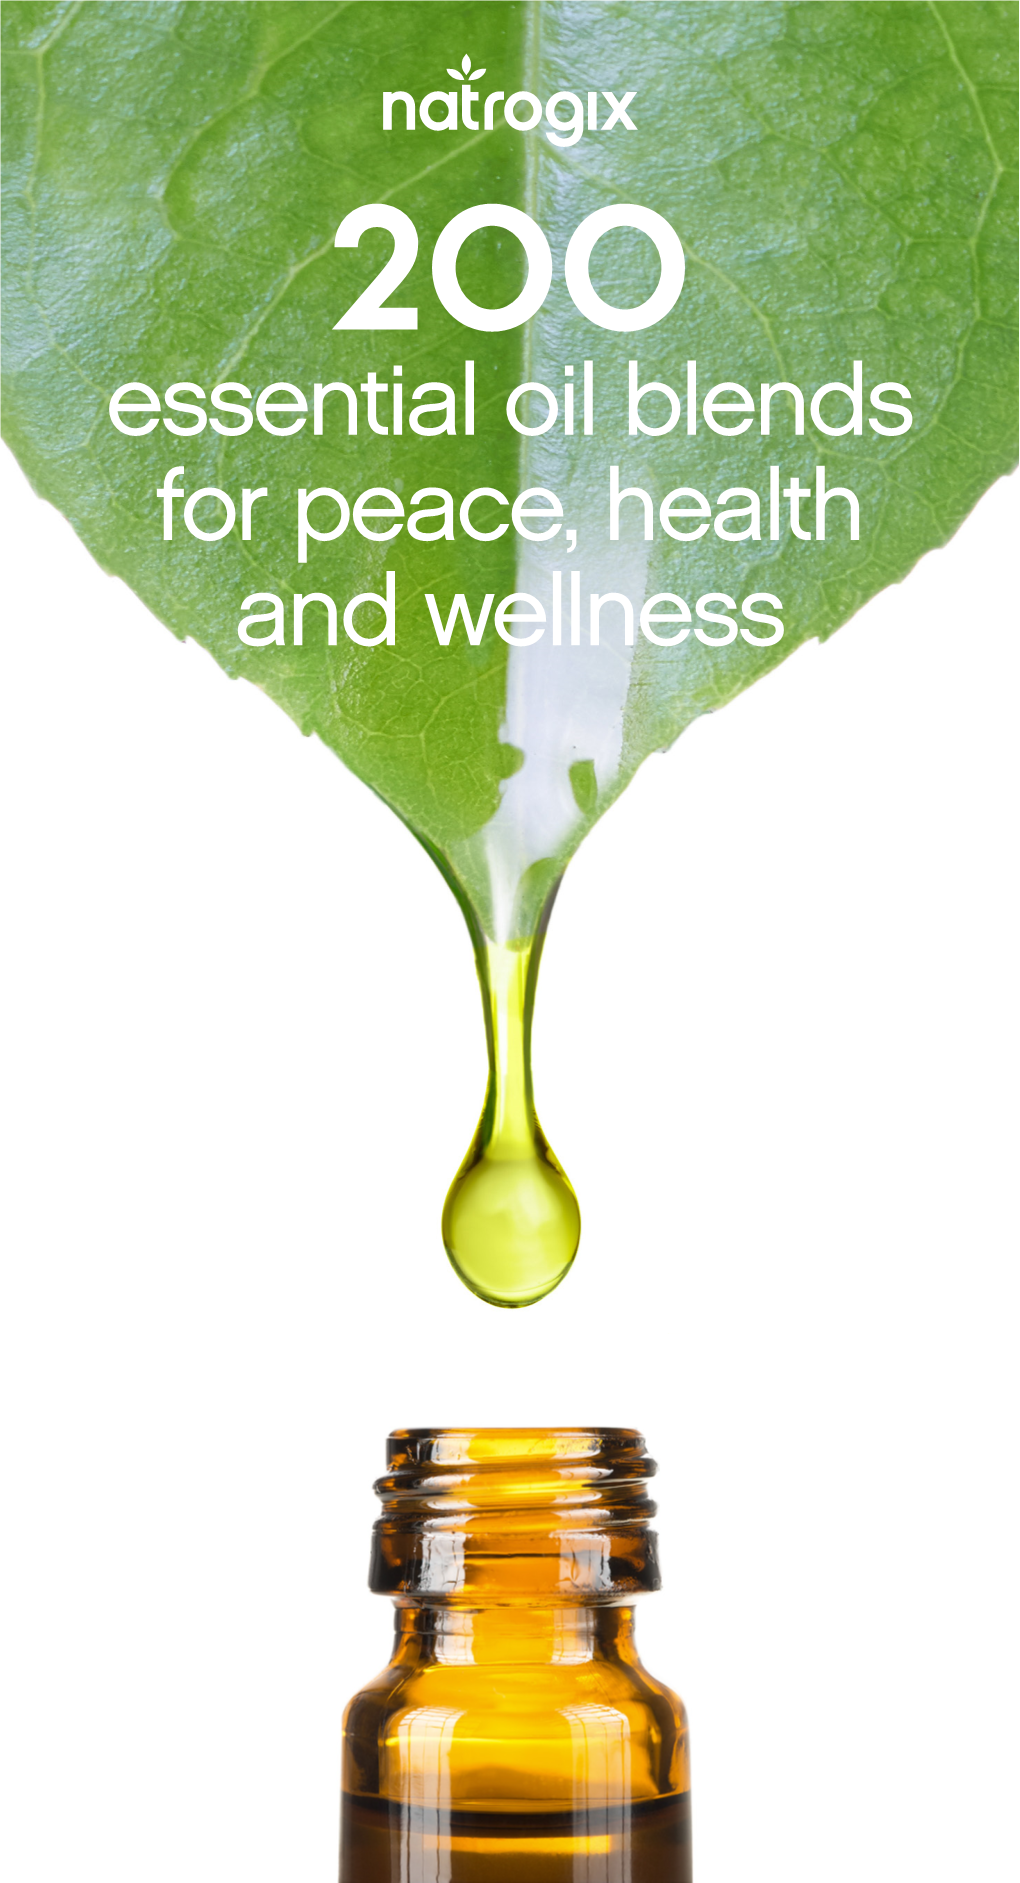 Essential Oil Blends for Peace, Health and Wellness Contents Recipes 4 Home 4 Clothes 6 Mood 7 Health 9